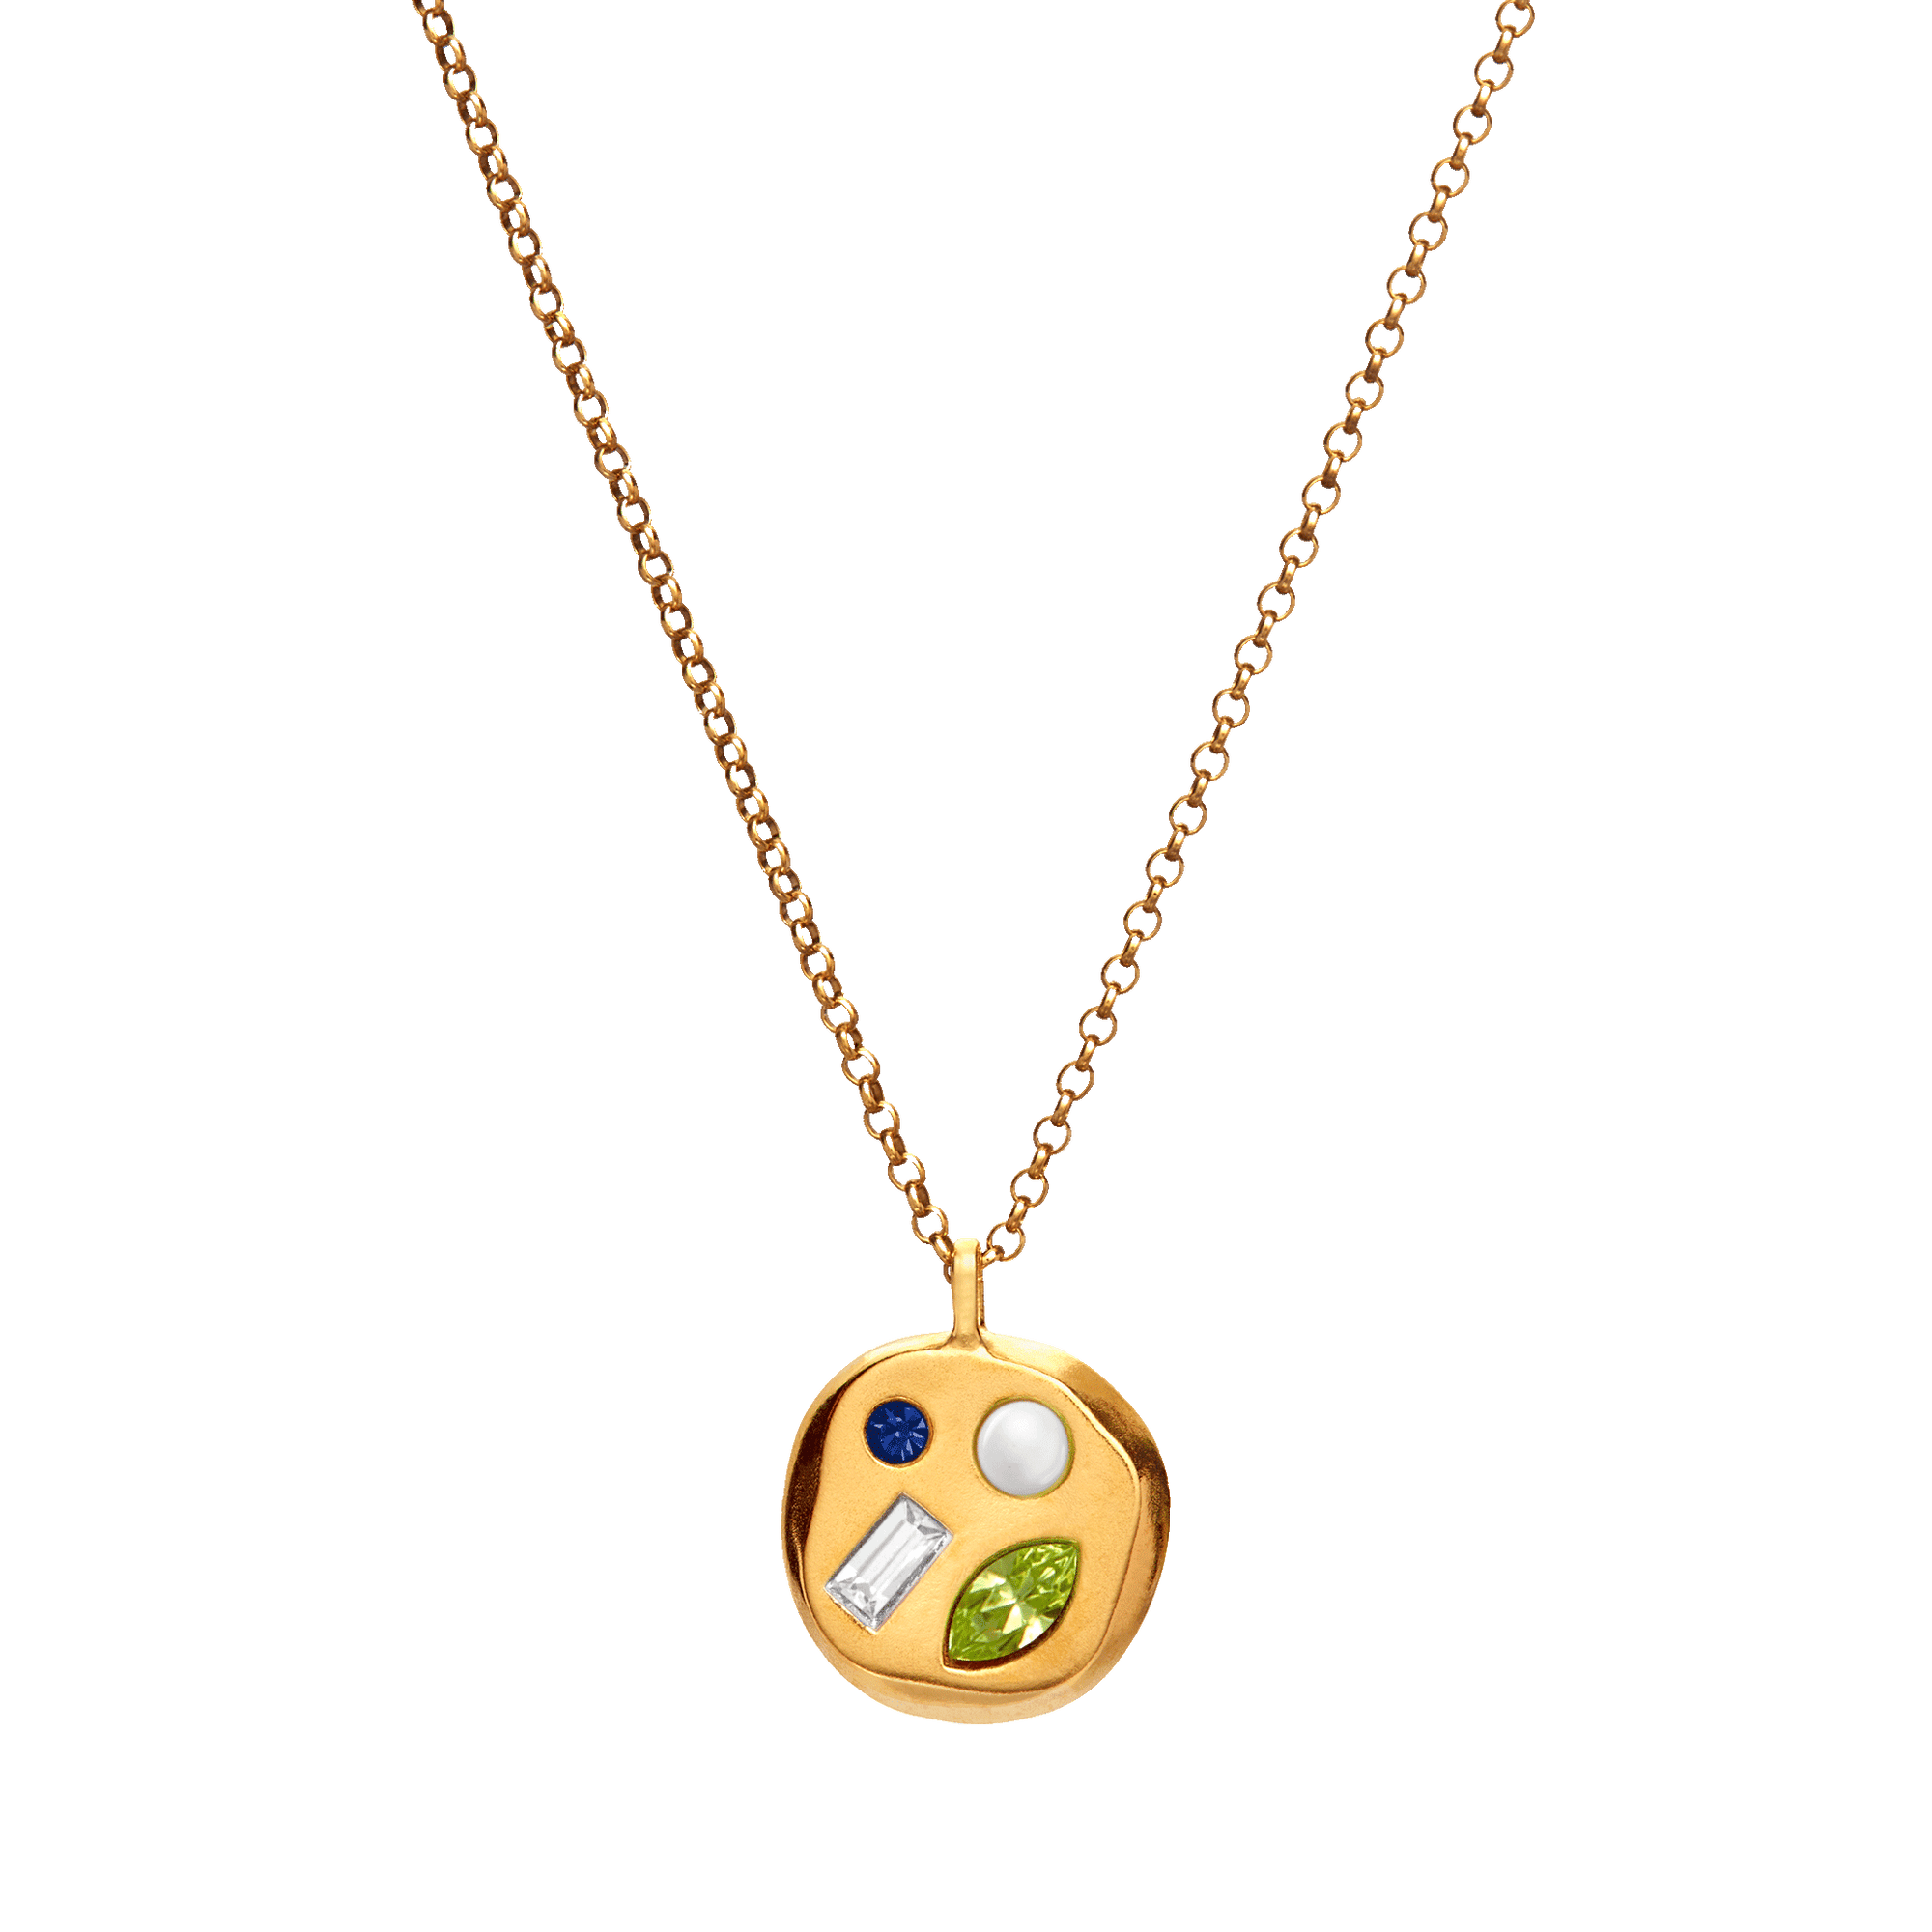 The August Second Pendant